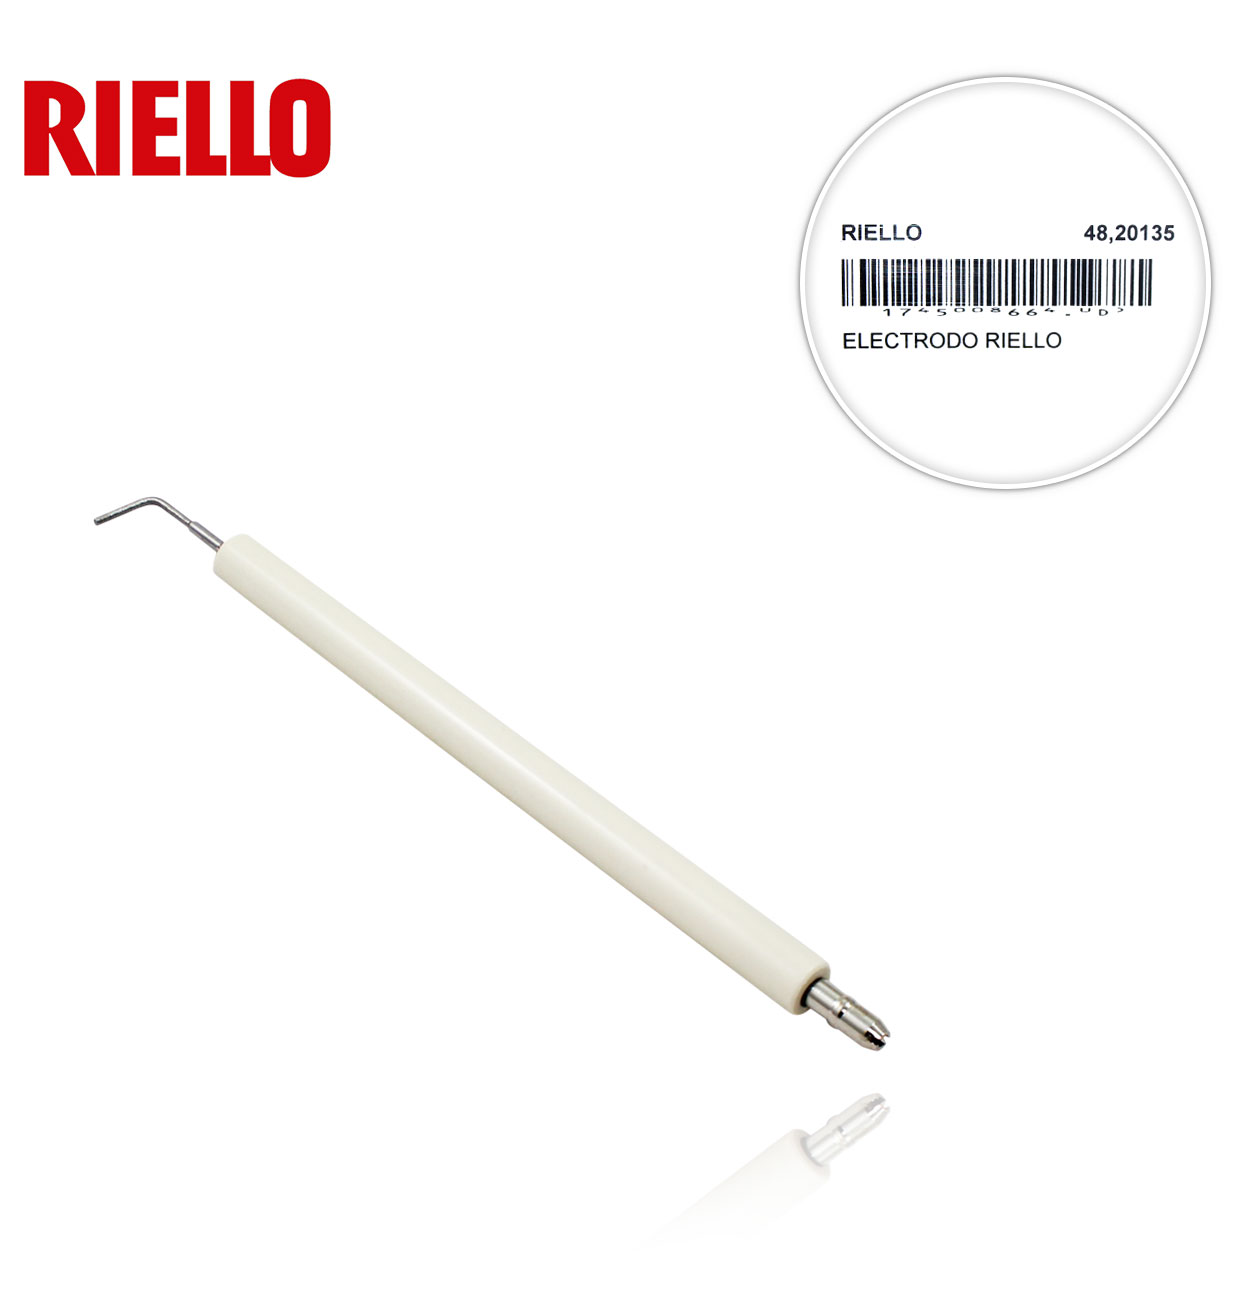 RIELLO 3006706 40FS15 IONISATION ELECTRODE